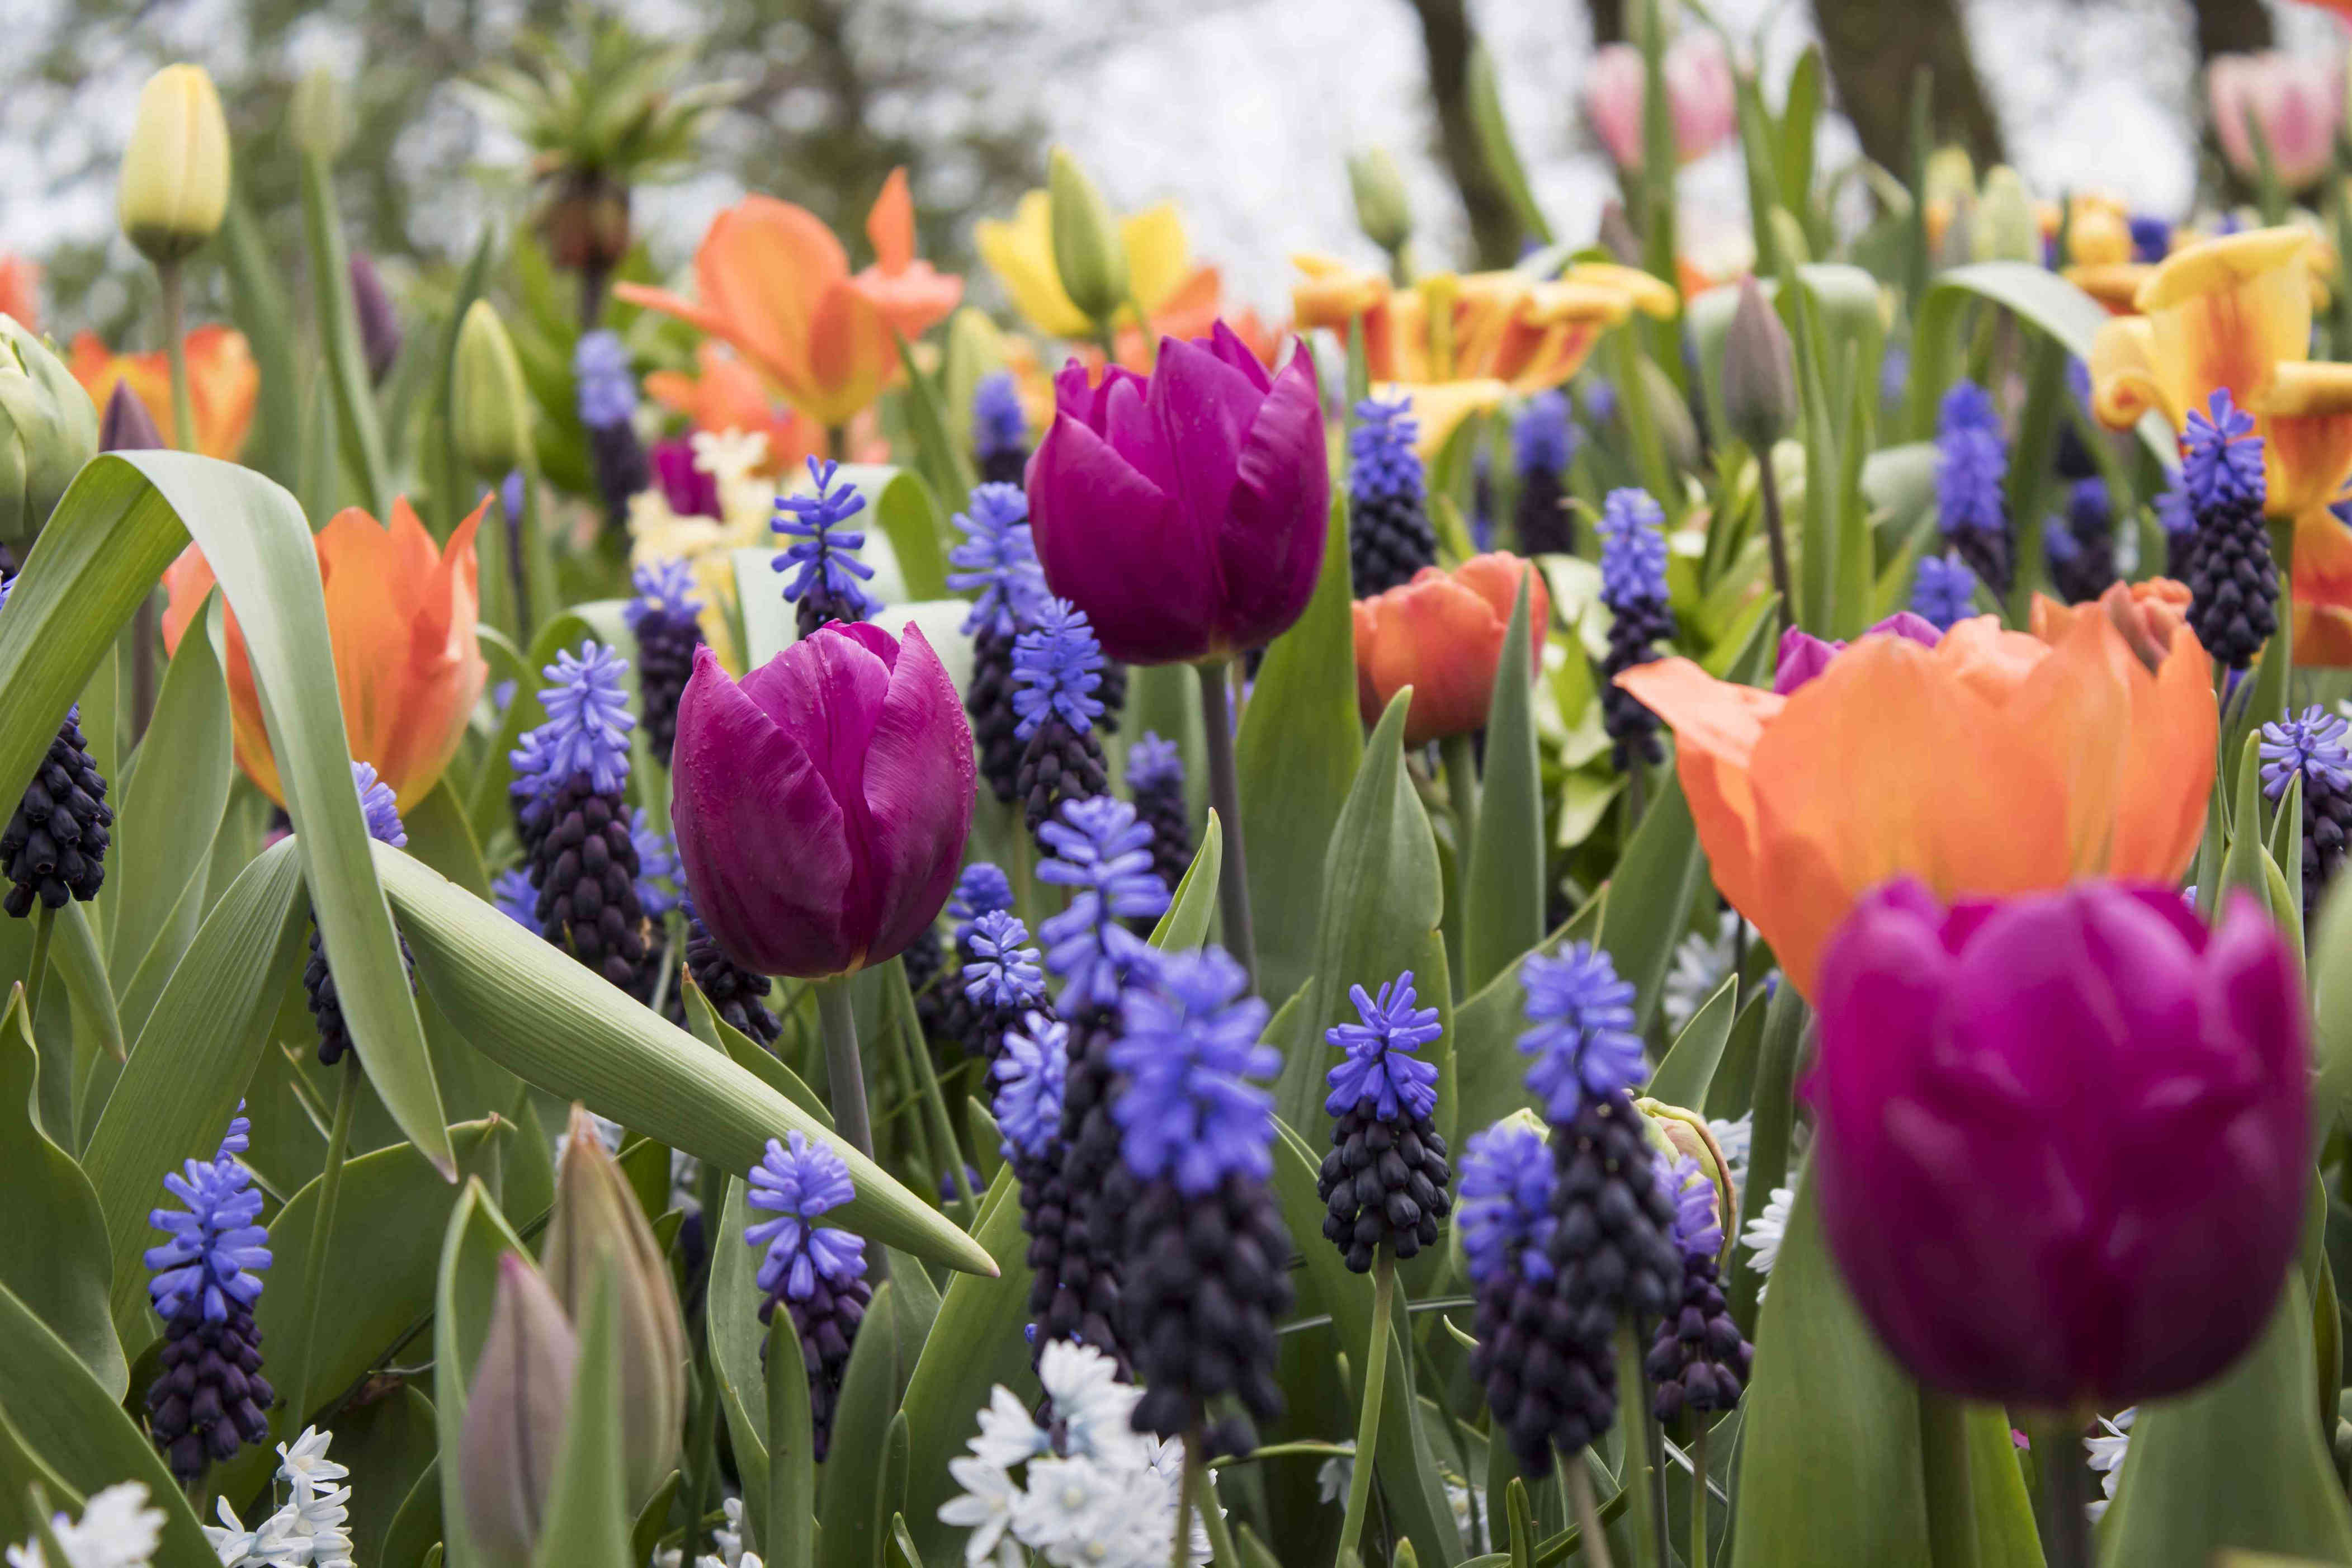 how to, 9 mistakes you're making when planting flower bulbs—and how to avoid them